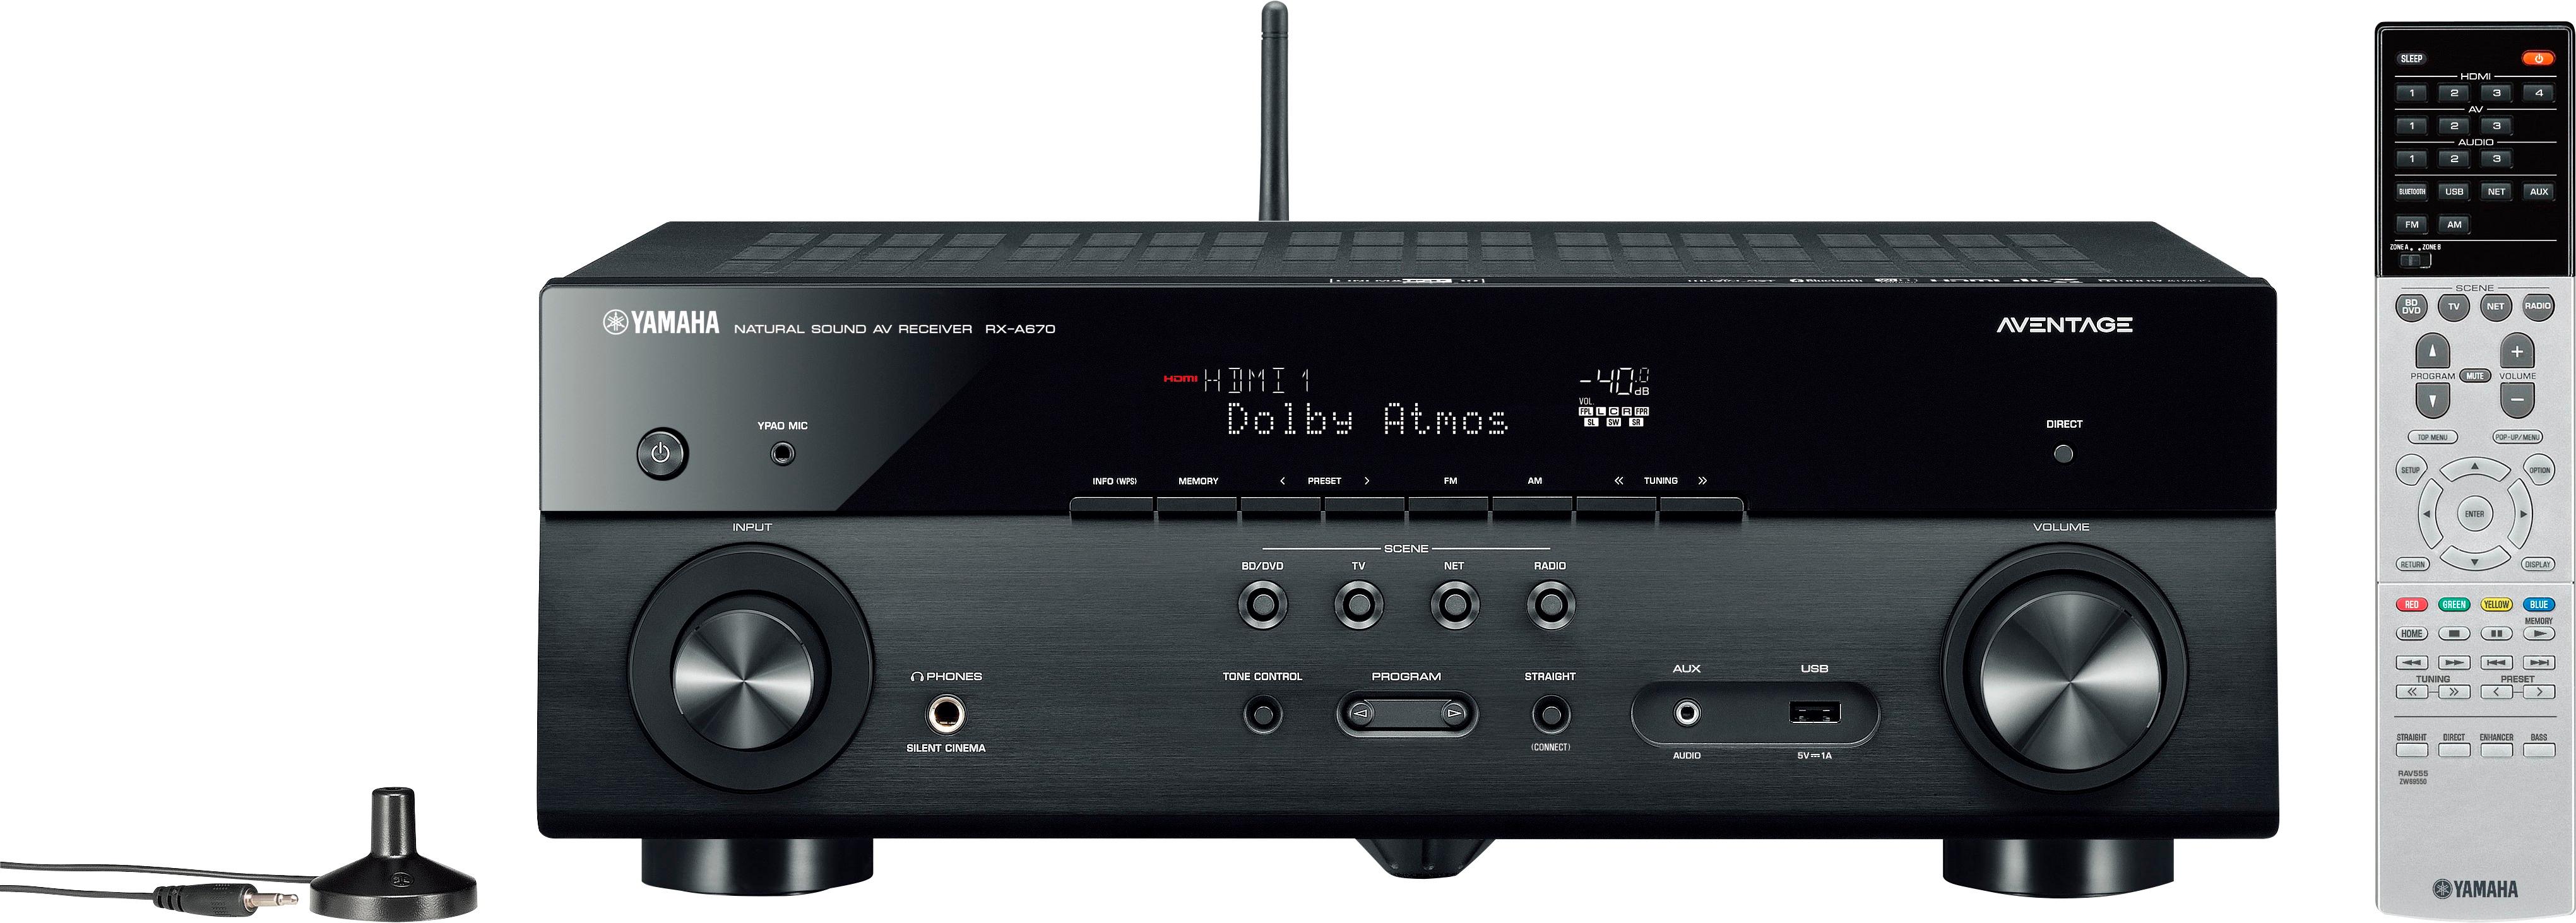 Huh pakket Persoonlijk Best Buy: Yamaha AVENTAGE 7.2-Ch. 4K Ultra HD A/V Home Theater Receiver  Black RX-A670BL